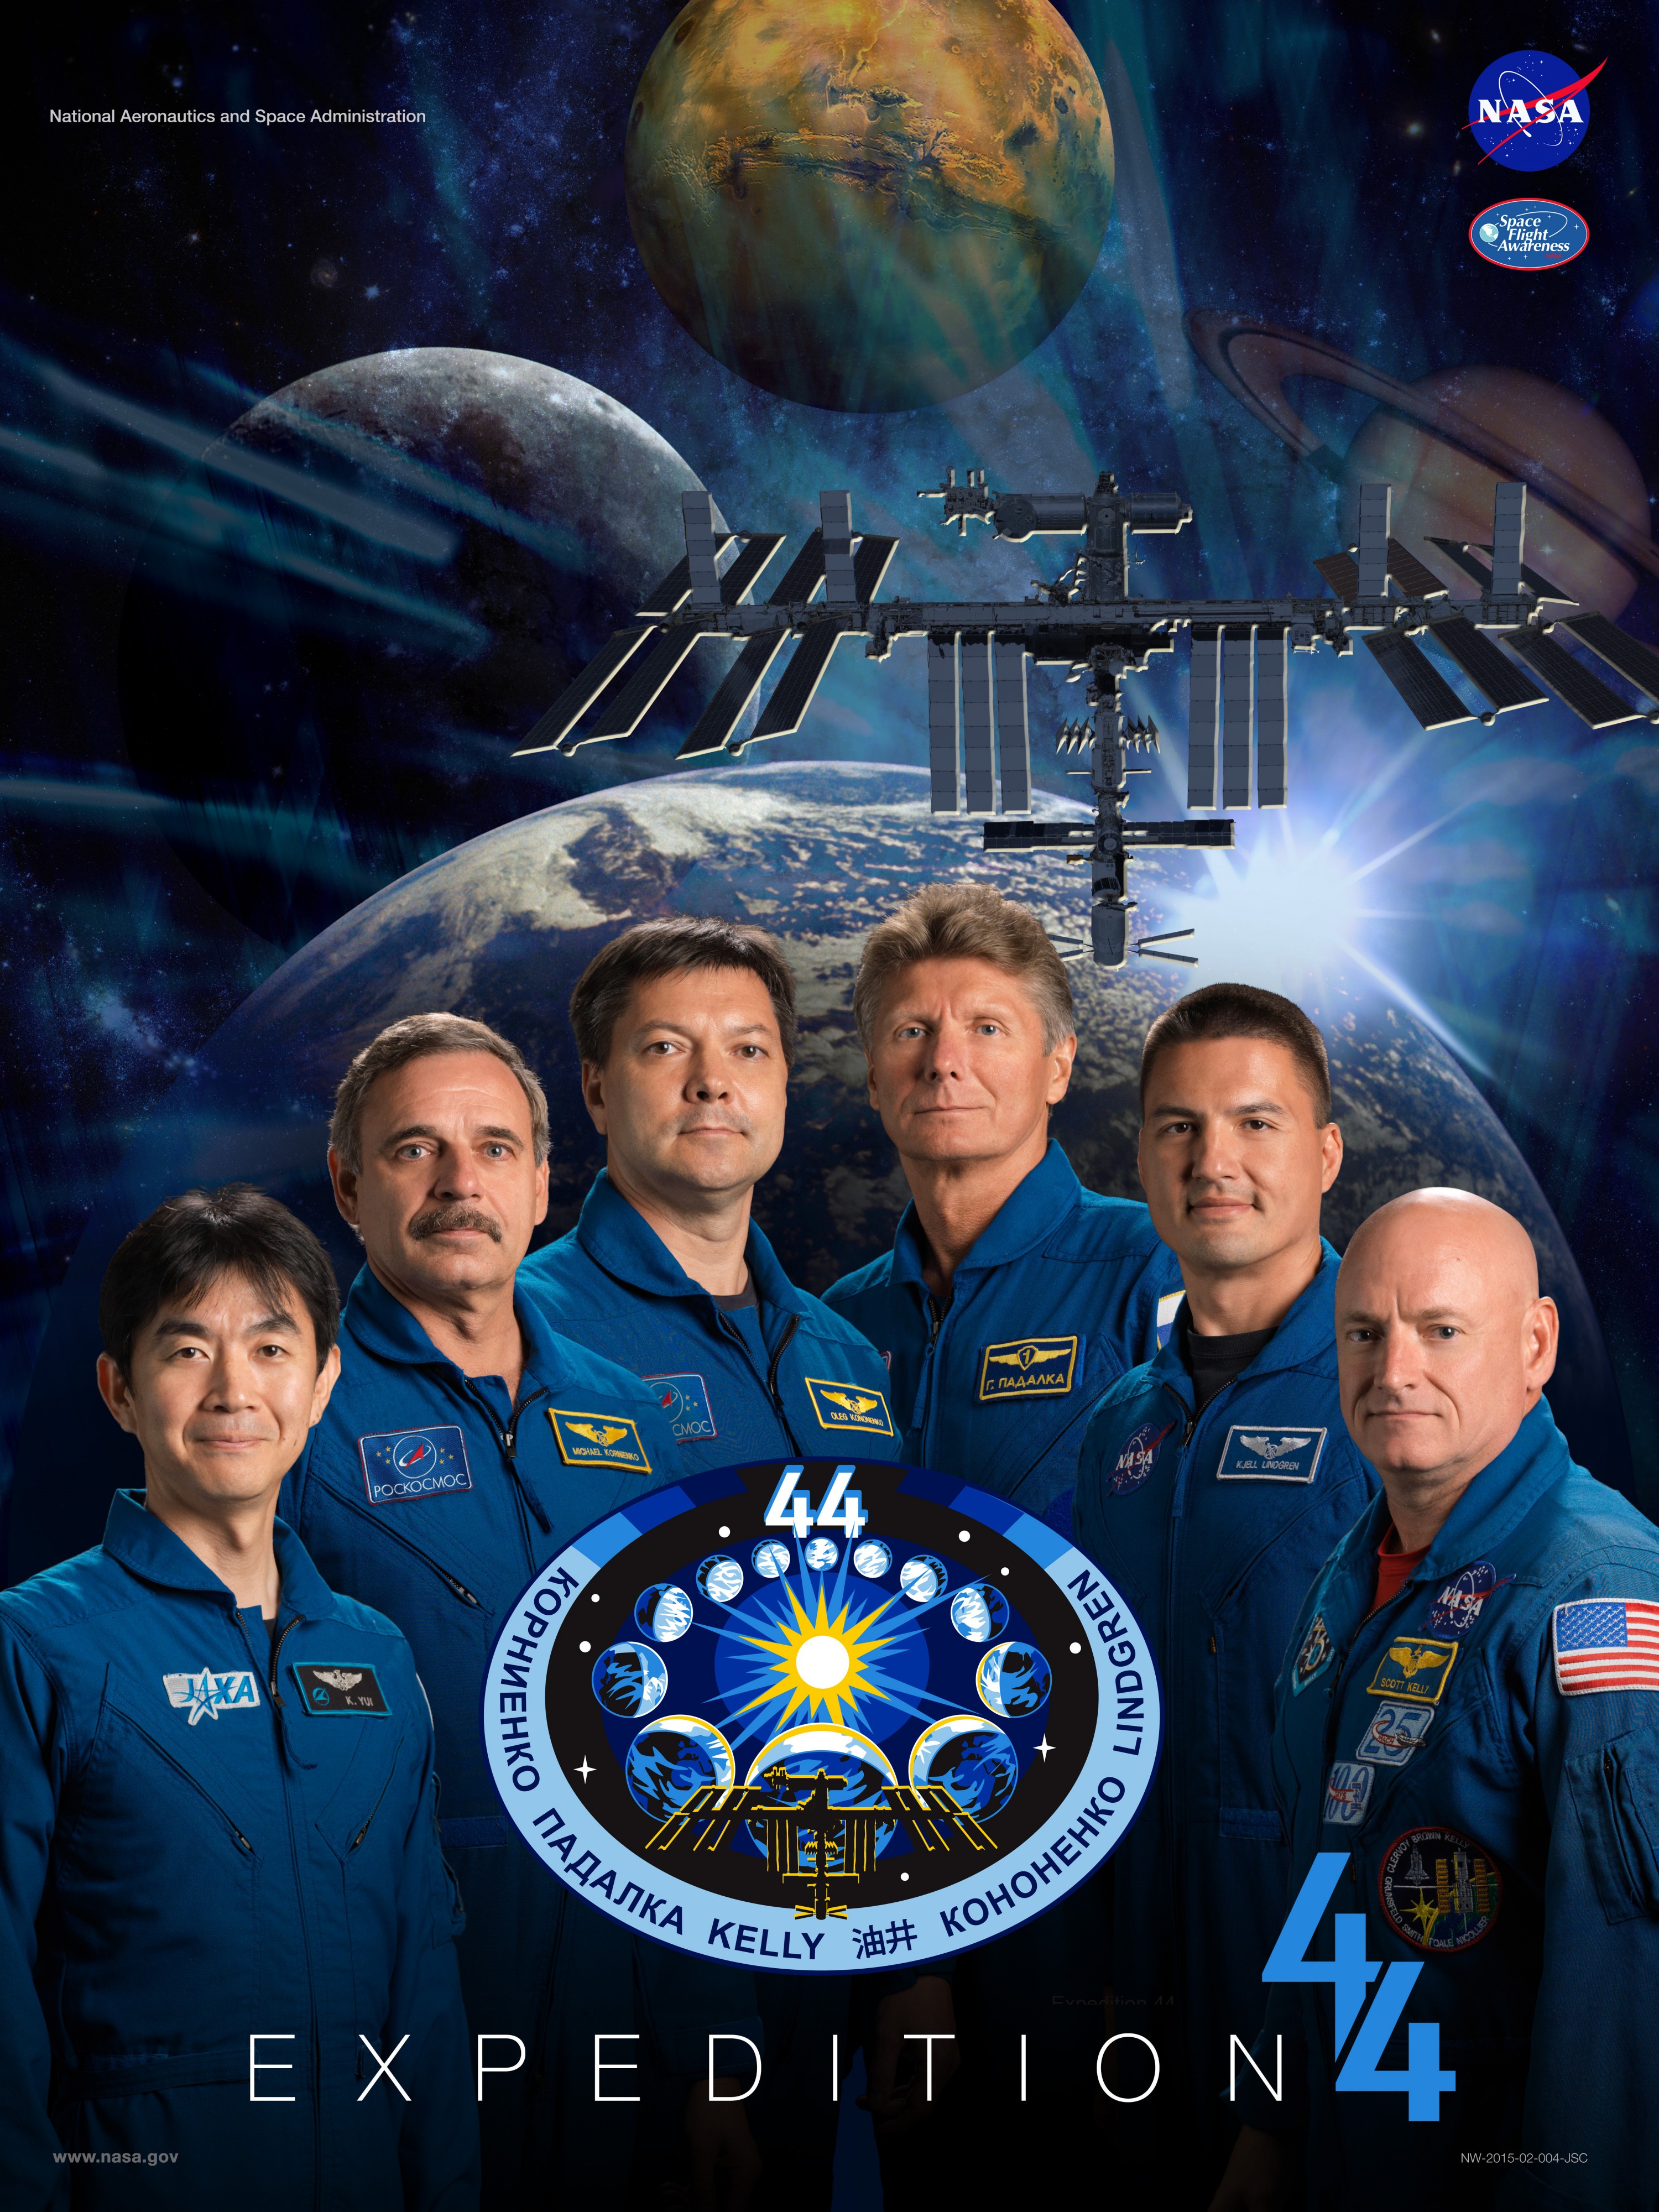 Expedition 44 crew poster